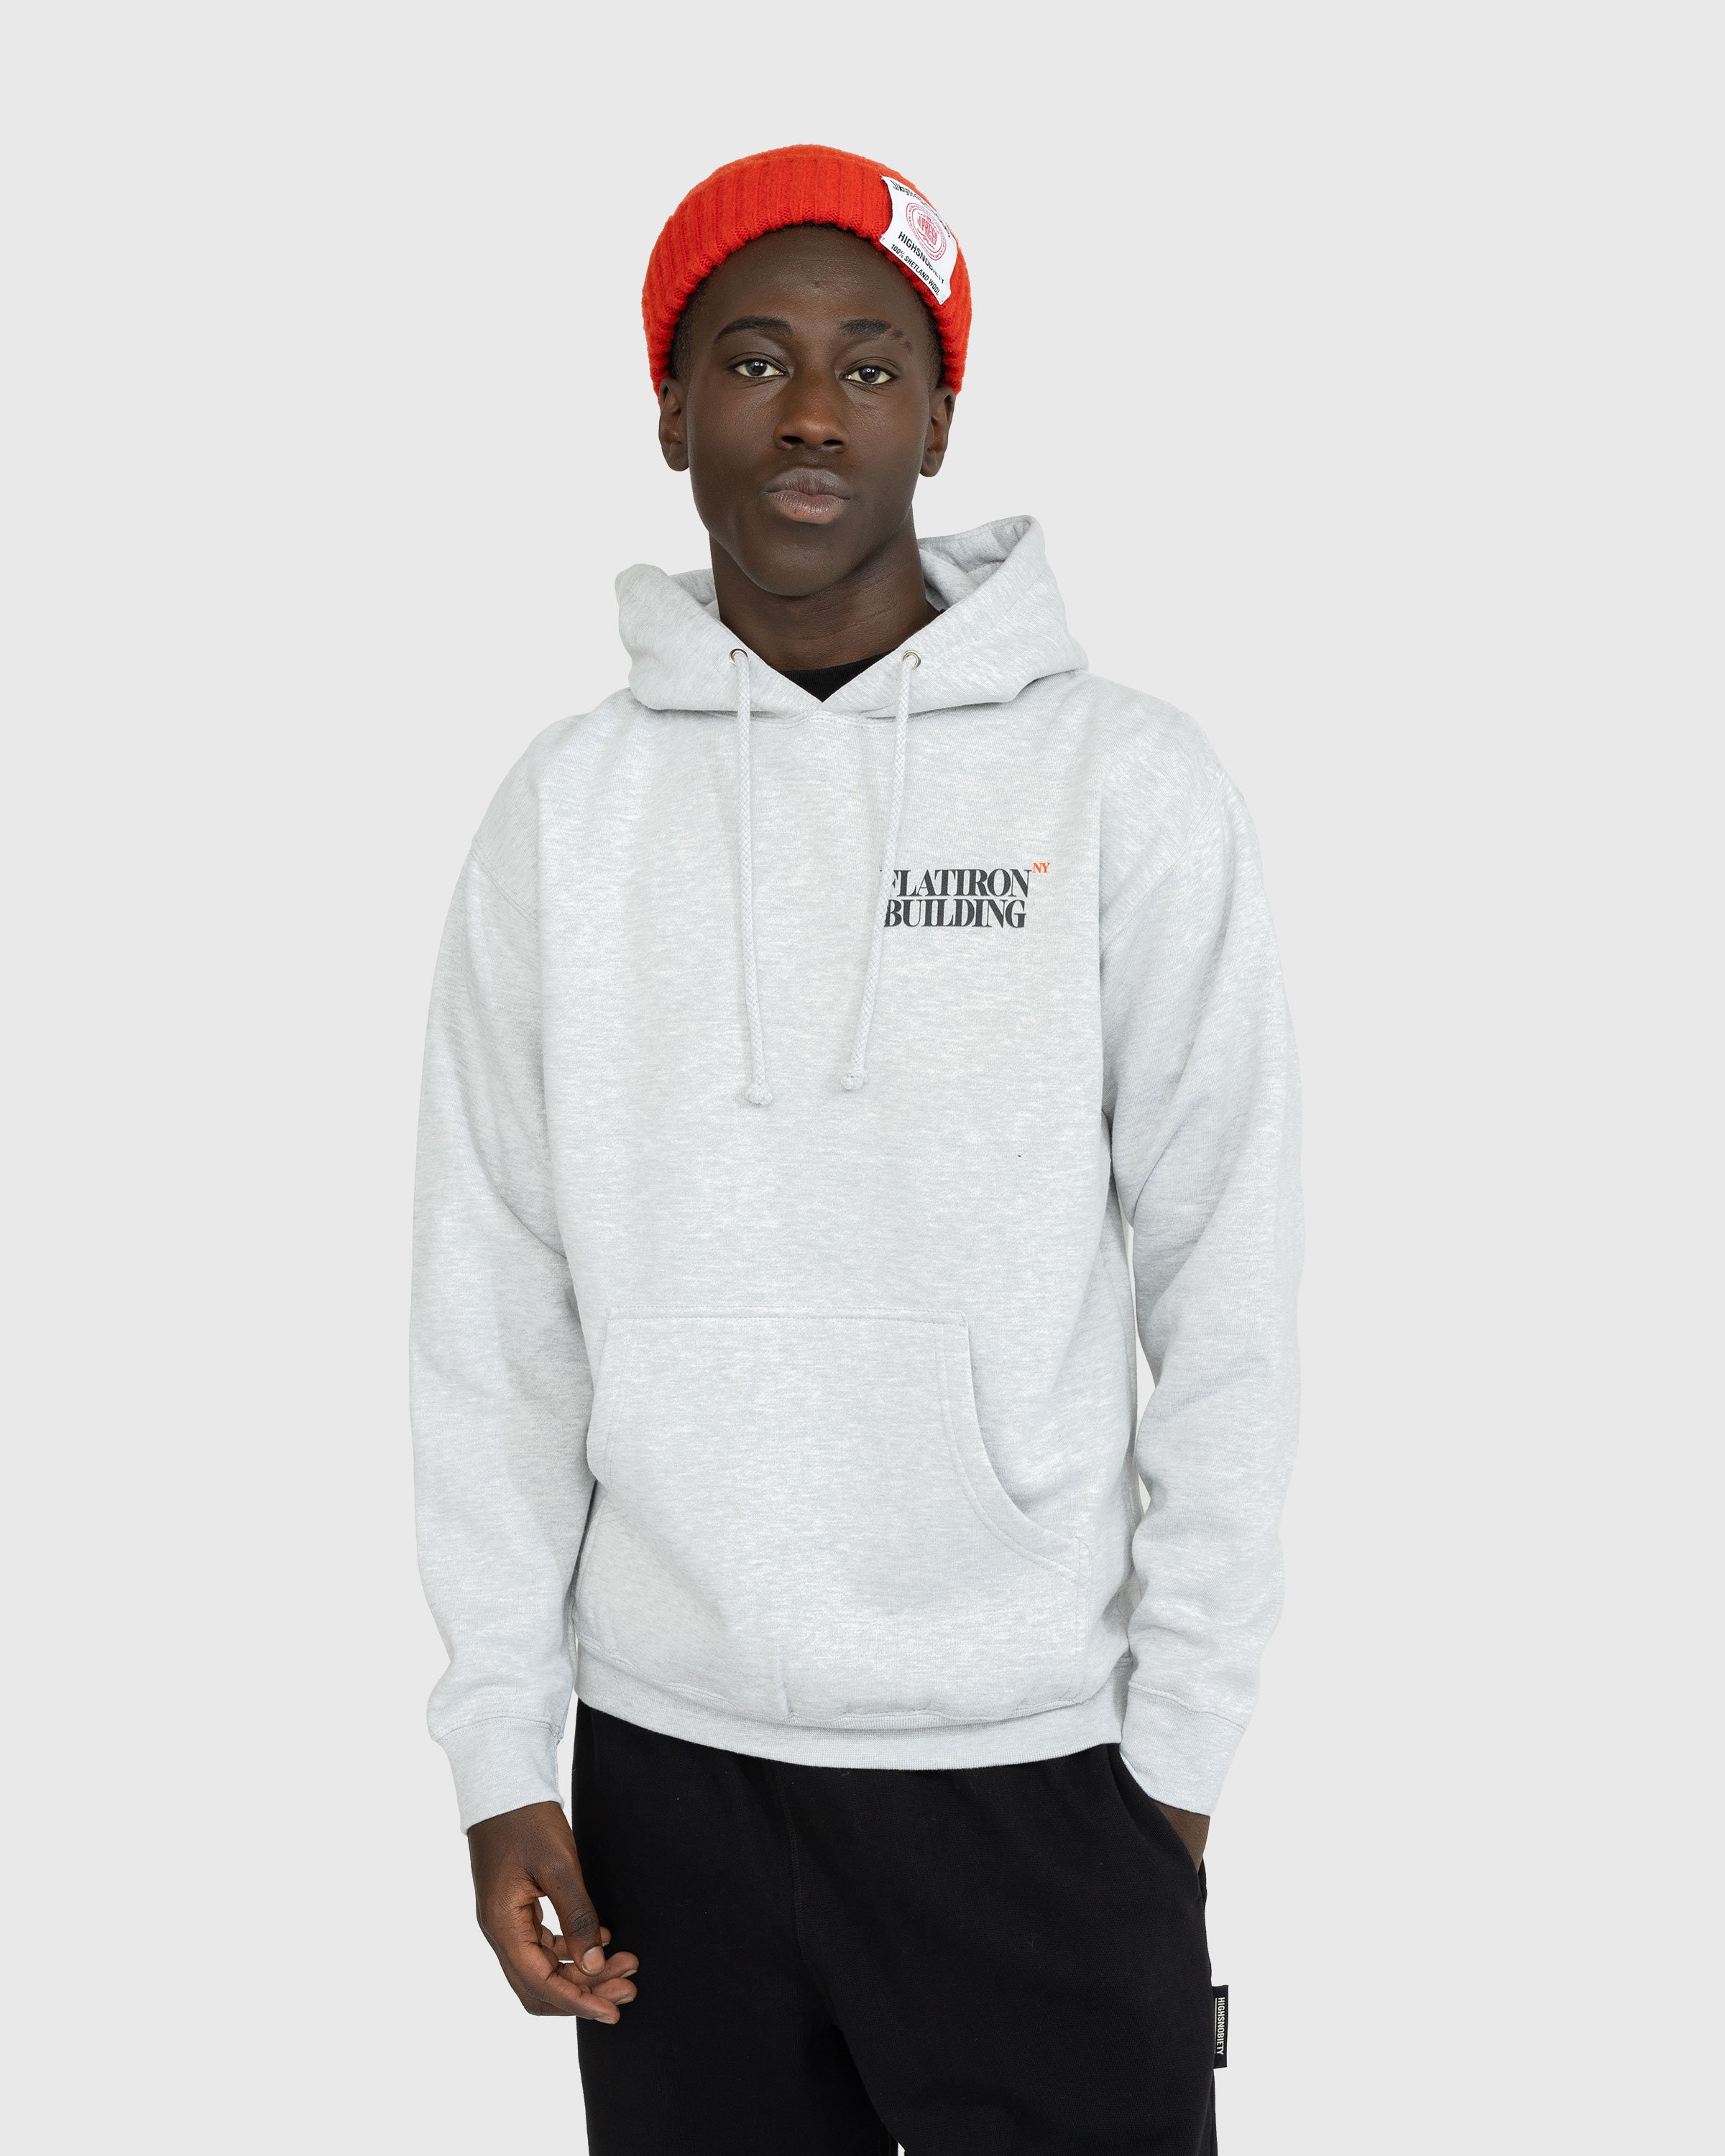 At The Moment x Highsnobiety - Flatiron Building Hoodie - Clothing - Grey - Image 4